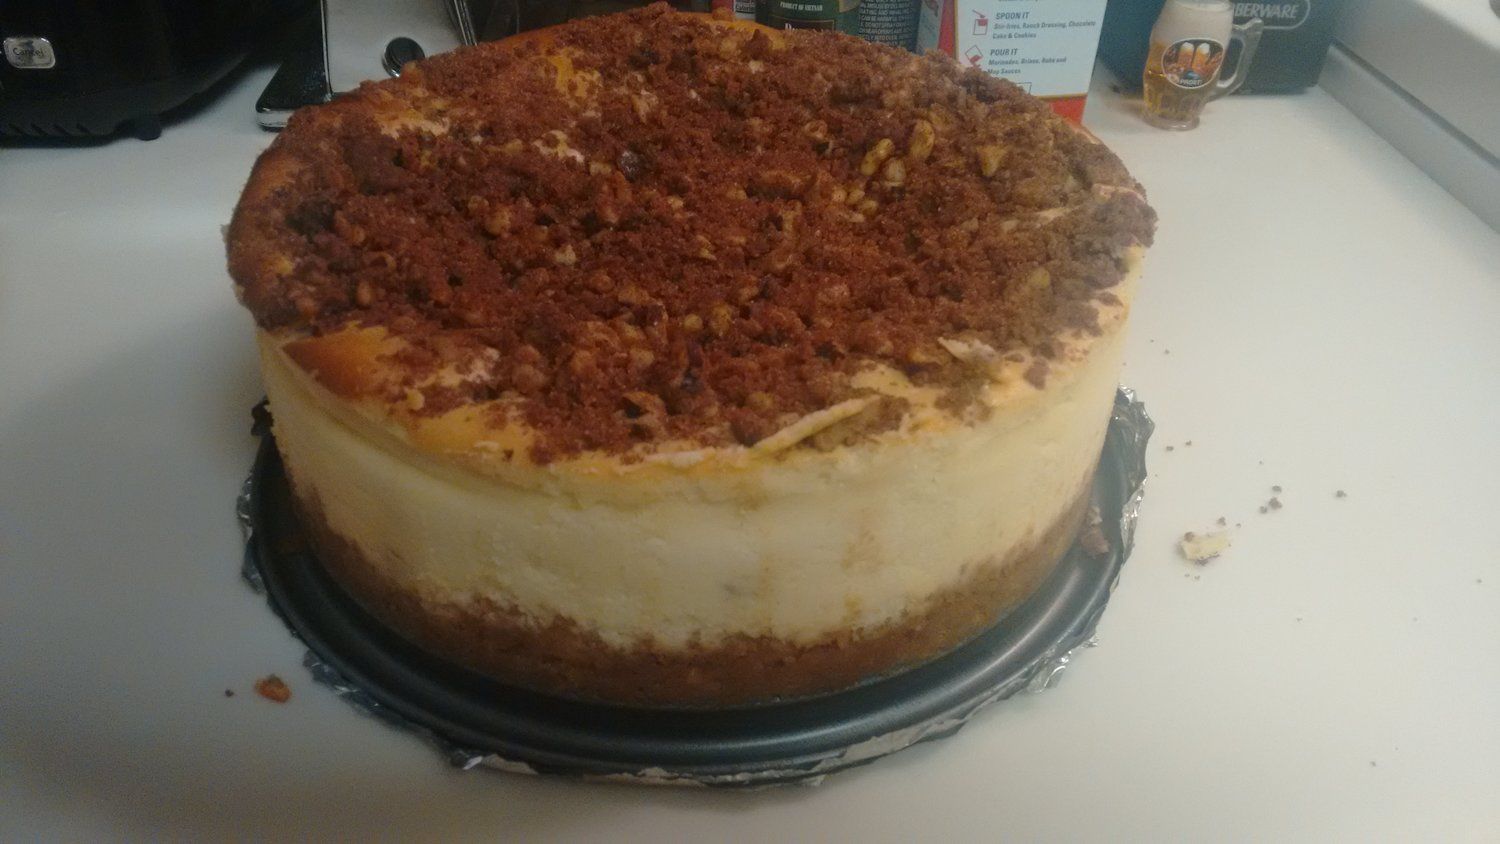 Mimicking Cheesecake Factory’s Dutch Apple Caramel Streusel Cheesecake: a Redemption Story